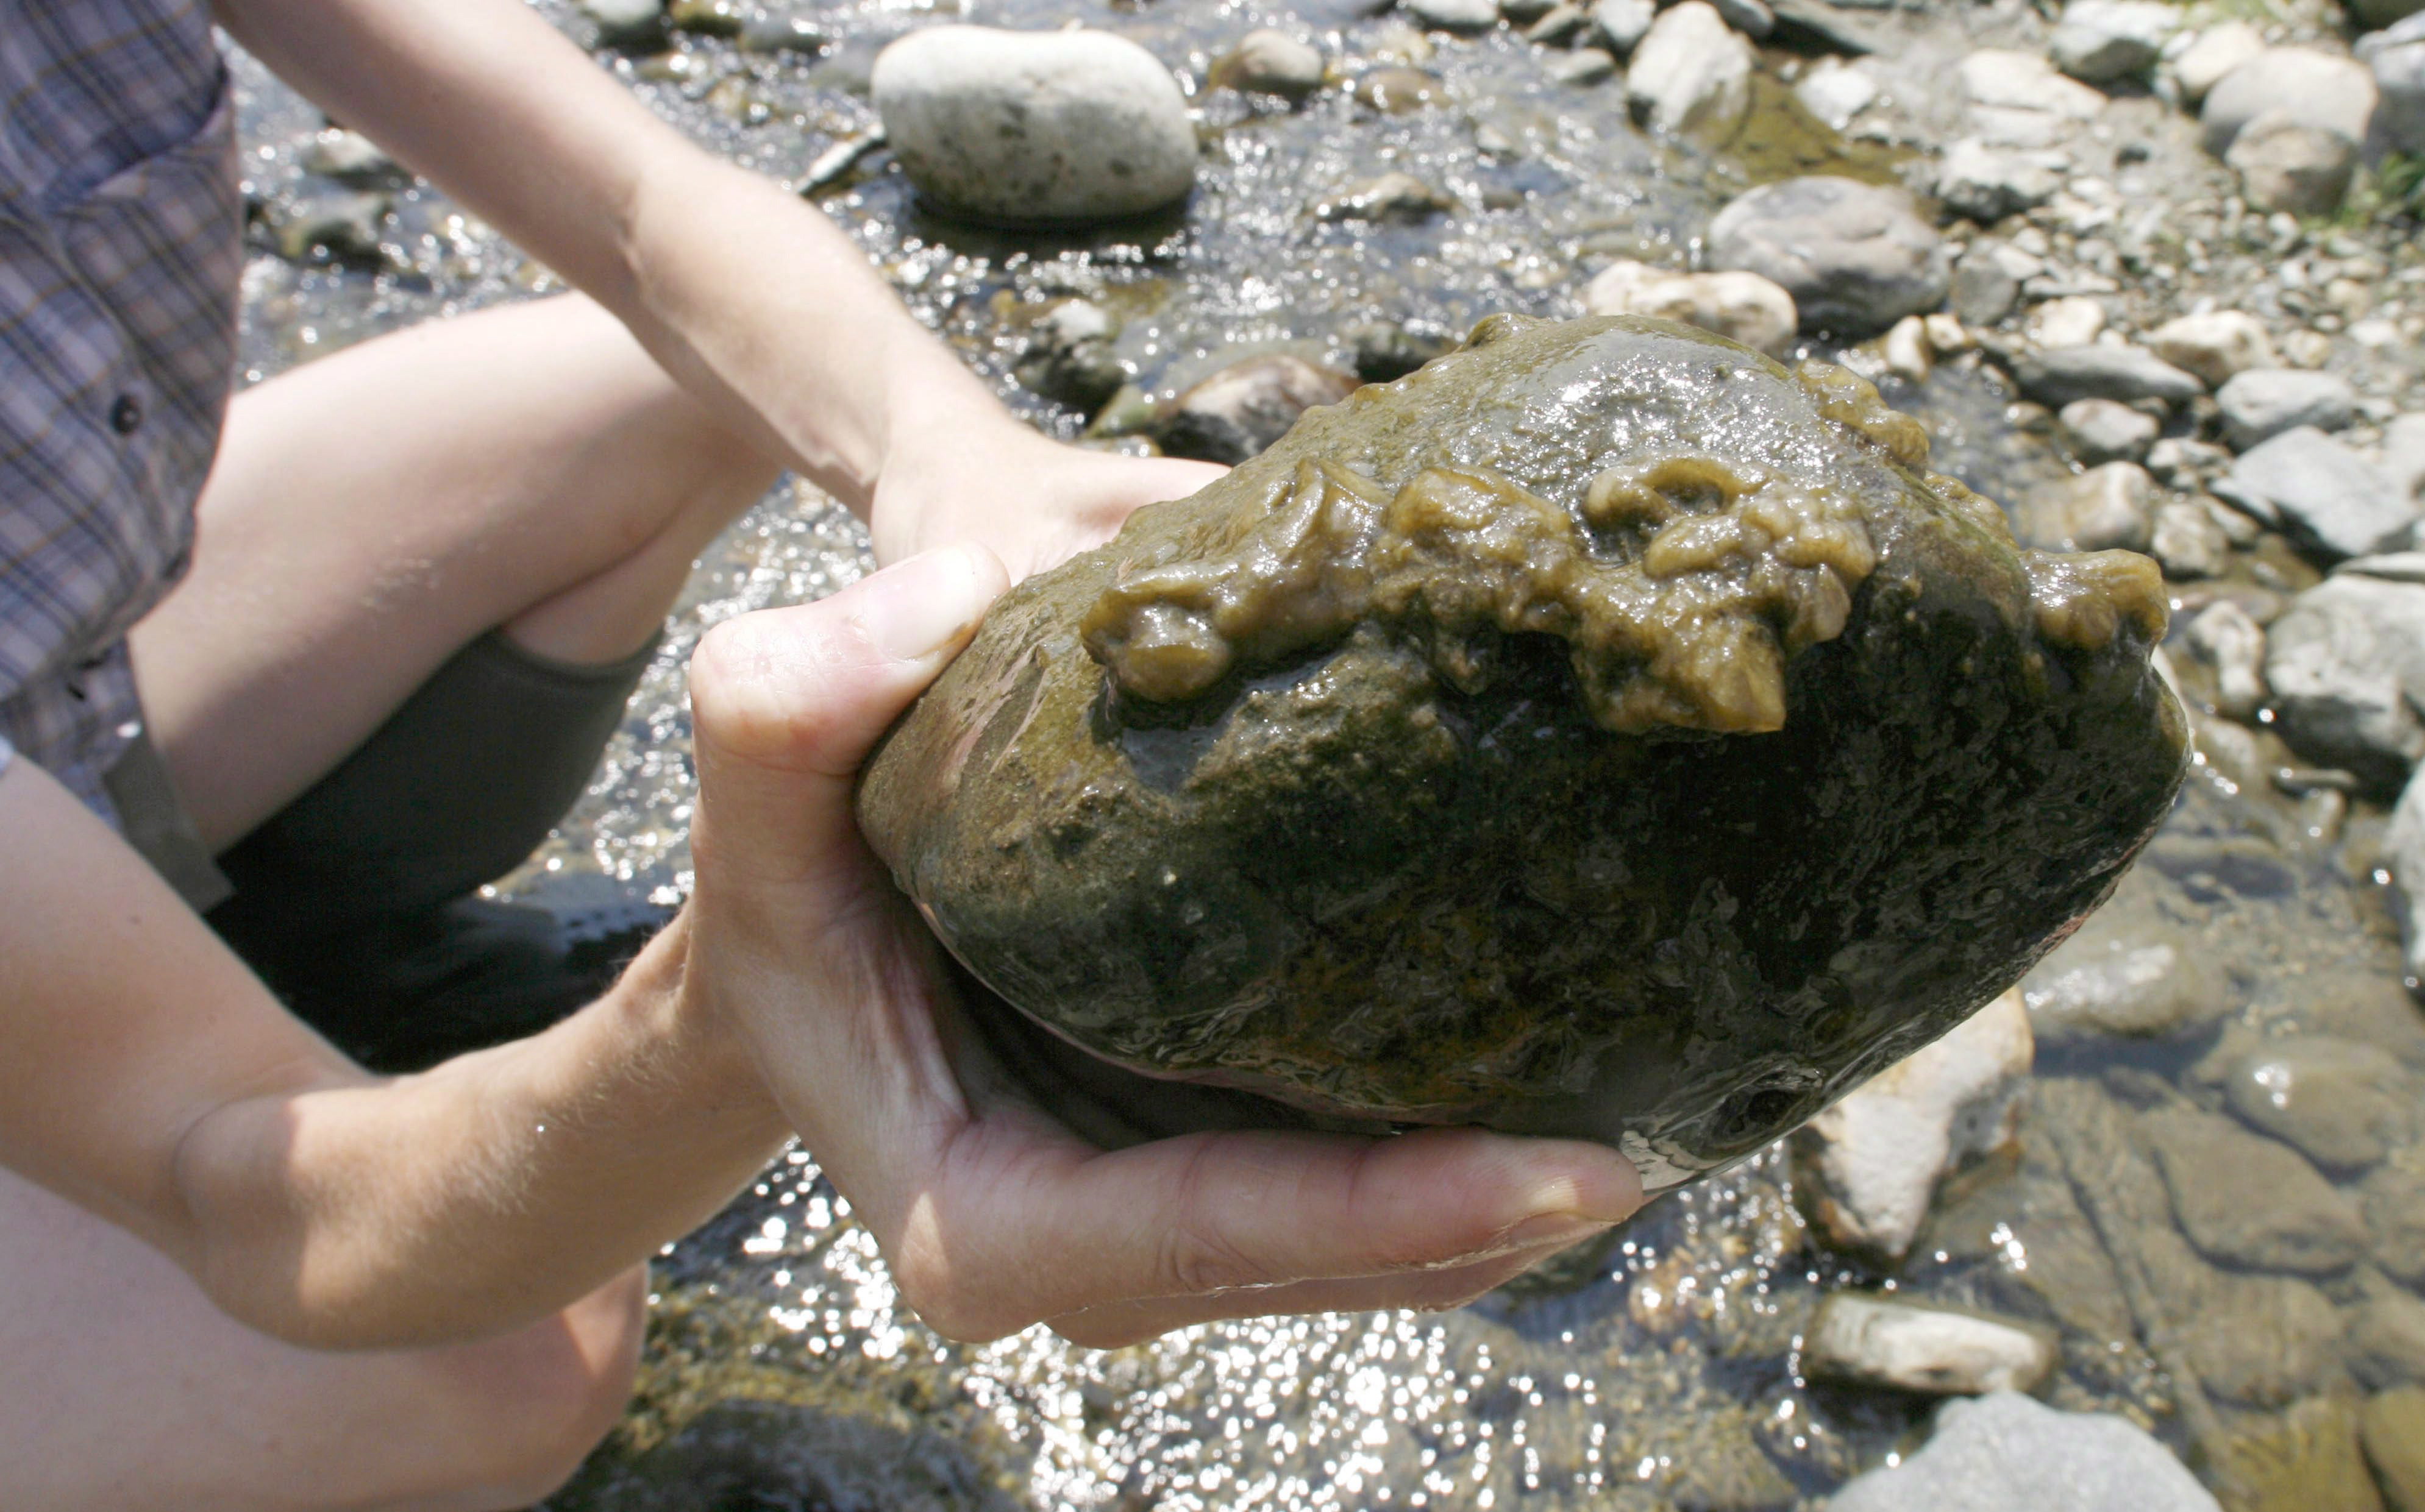 A woman holds a rock covered with the aquatic algae Didymosphenia geminata -- known as didymo, or rock snot -- in the White River in Stockbridge, Vermont. (Toby Talbot / The Canadian Press / AP)